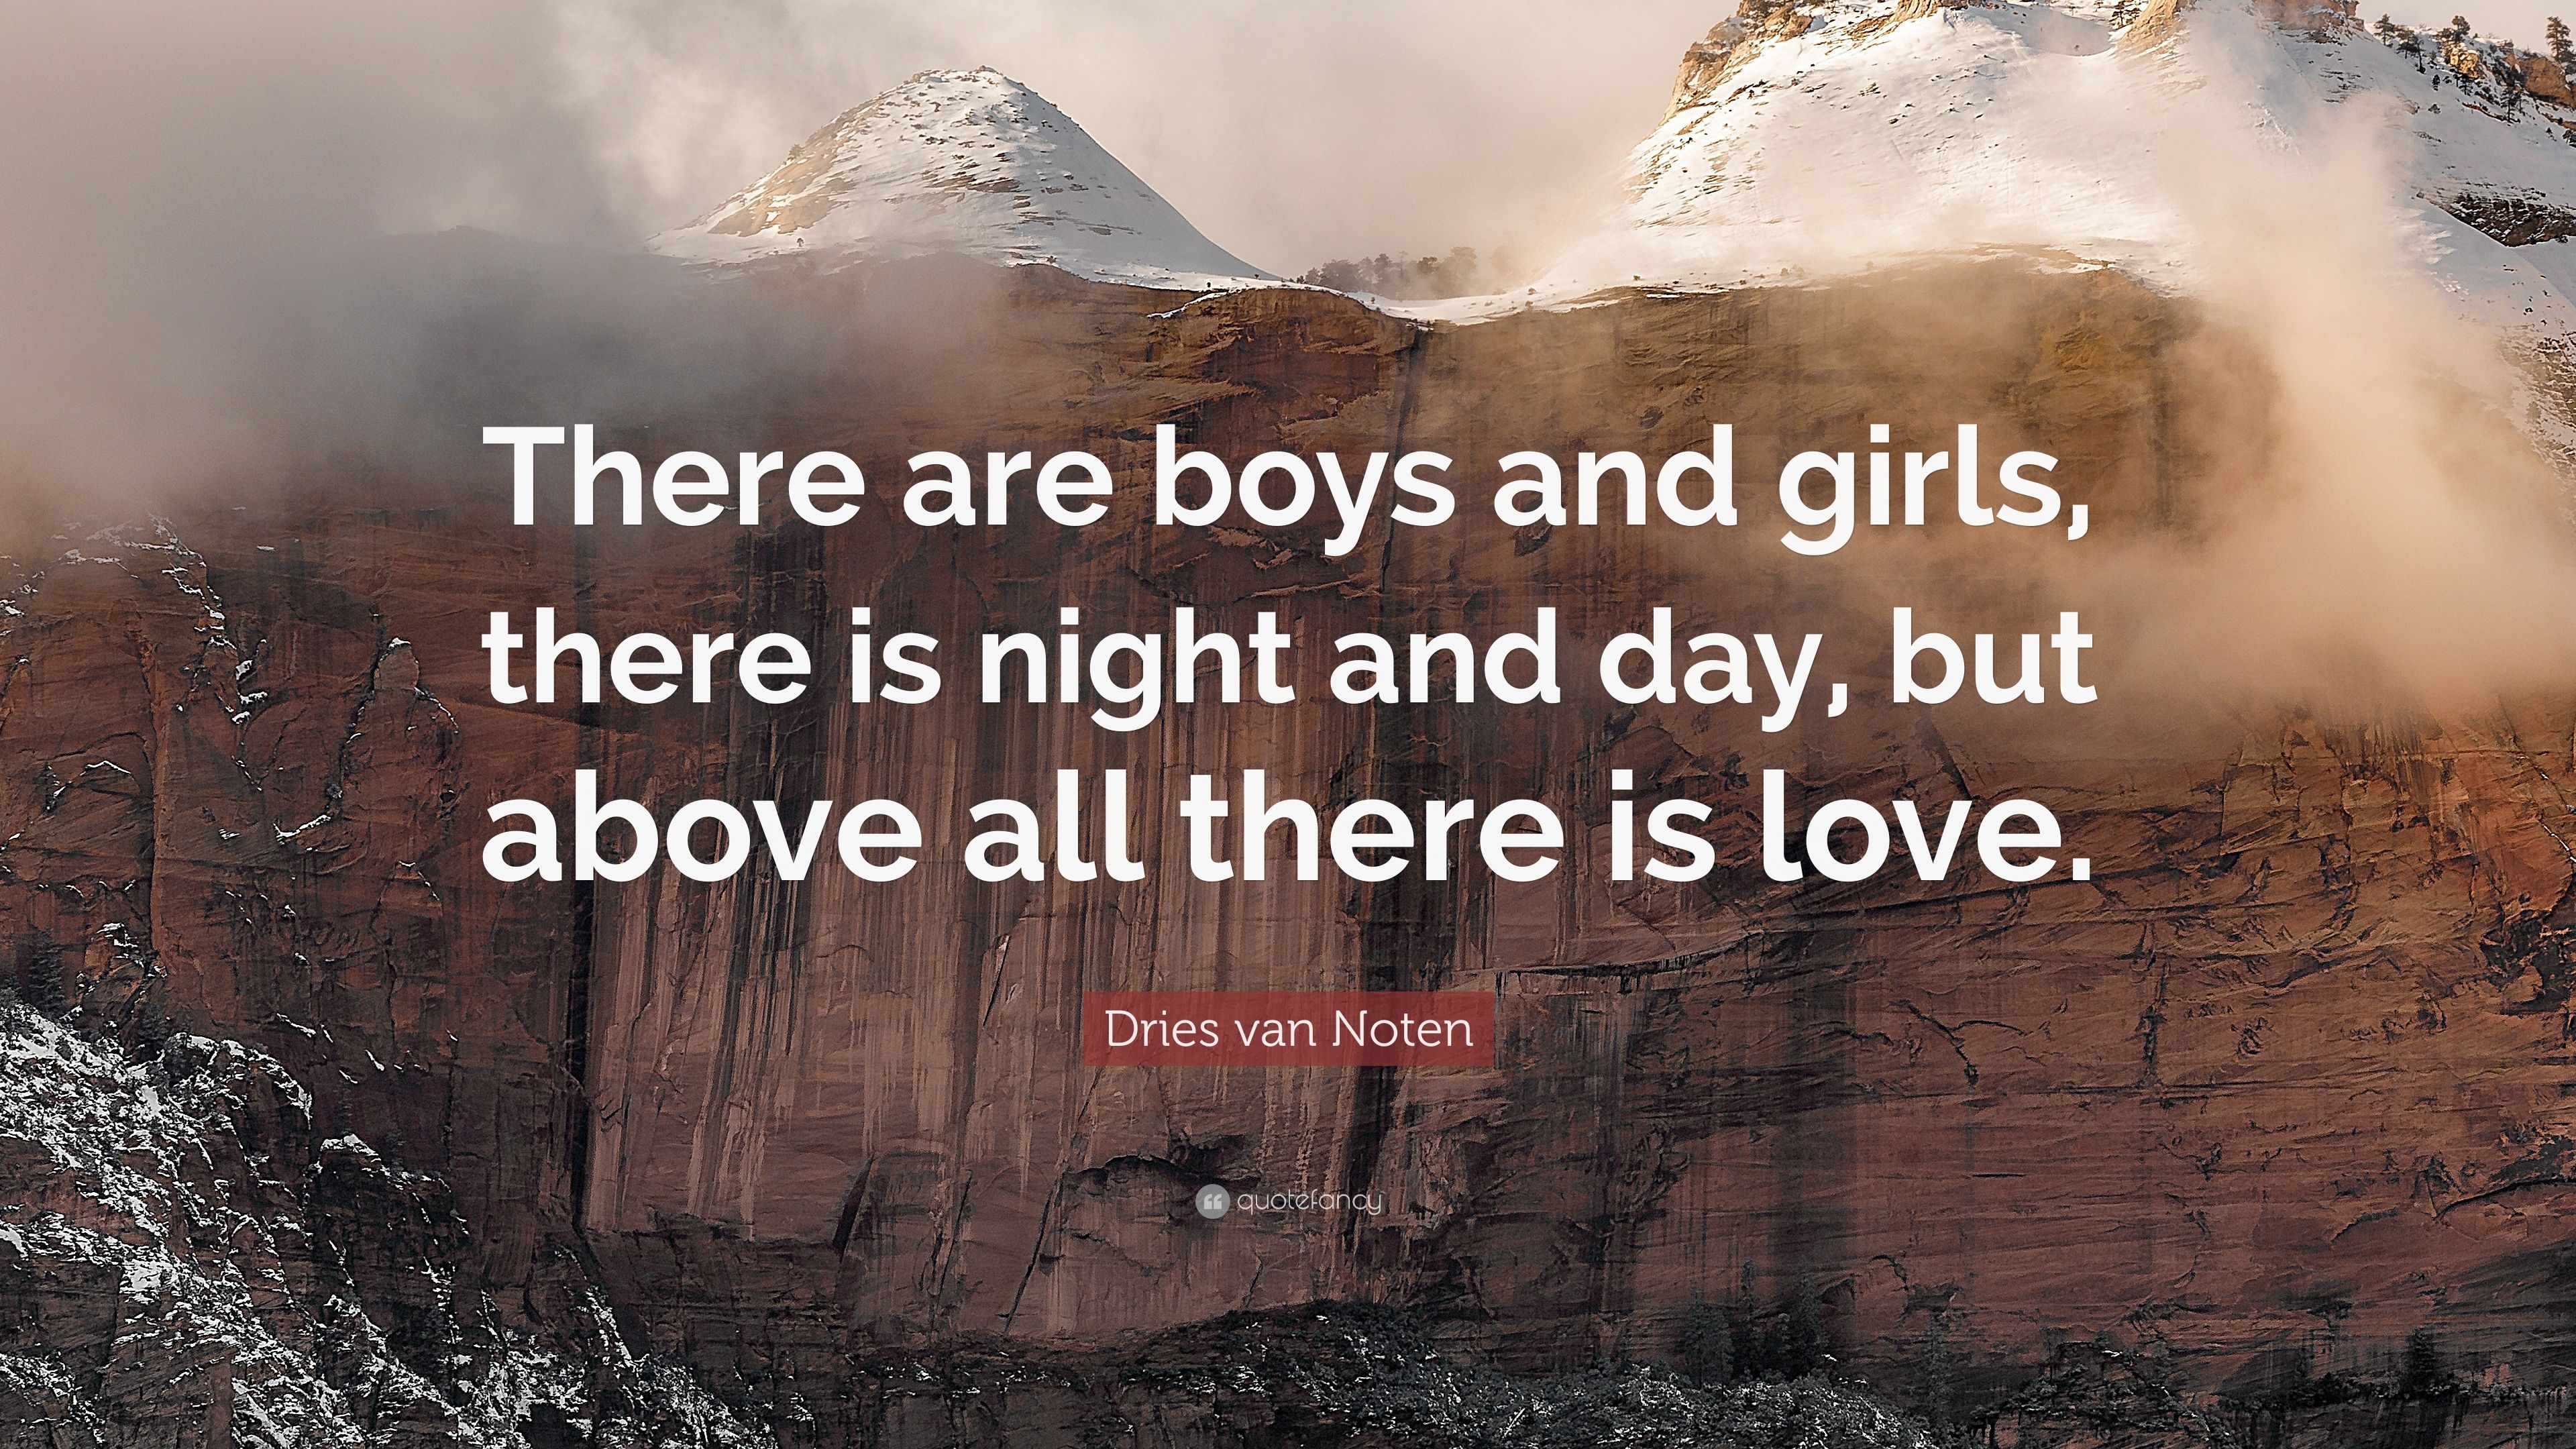 Dries van Noten Quote: “There are boys and girls, there is night